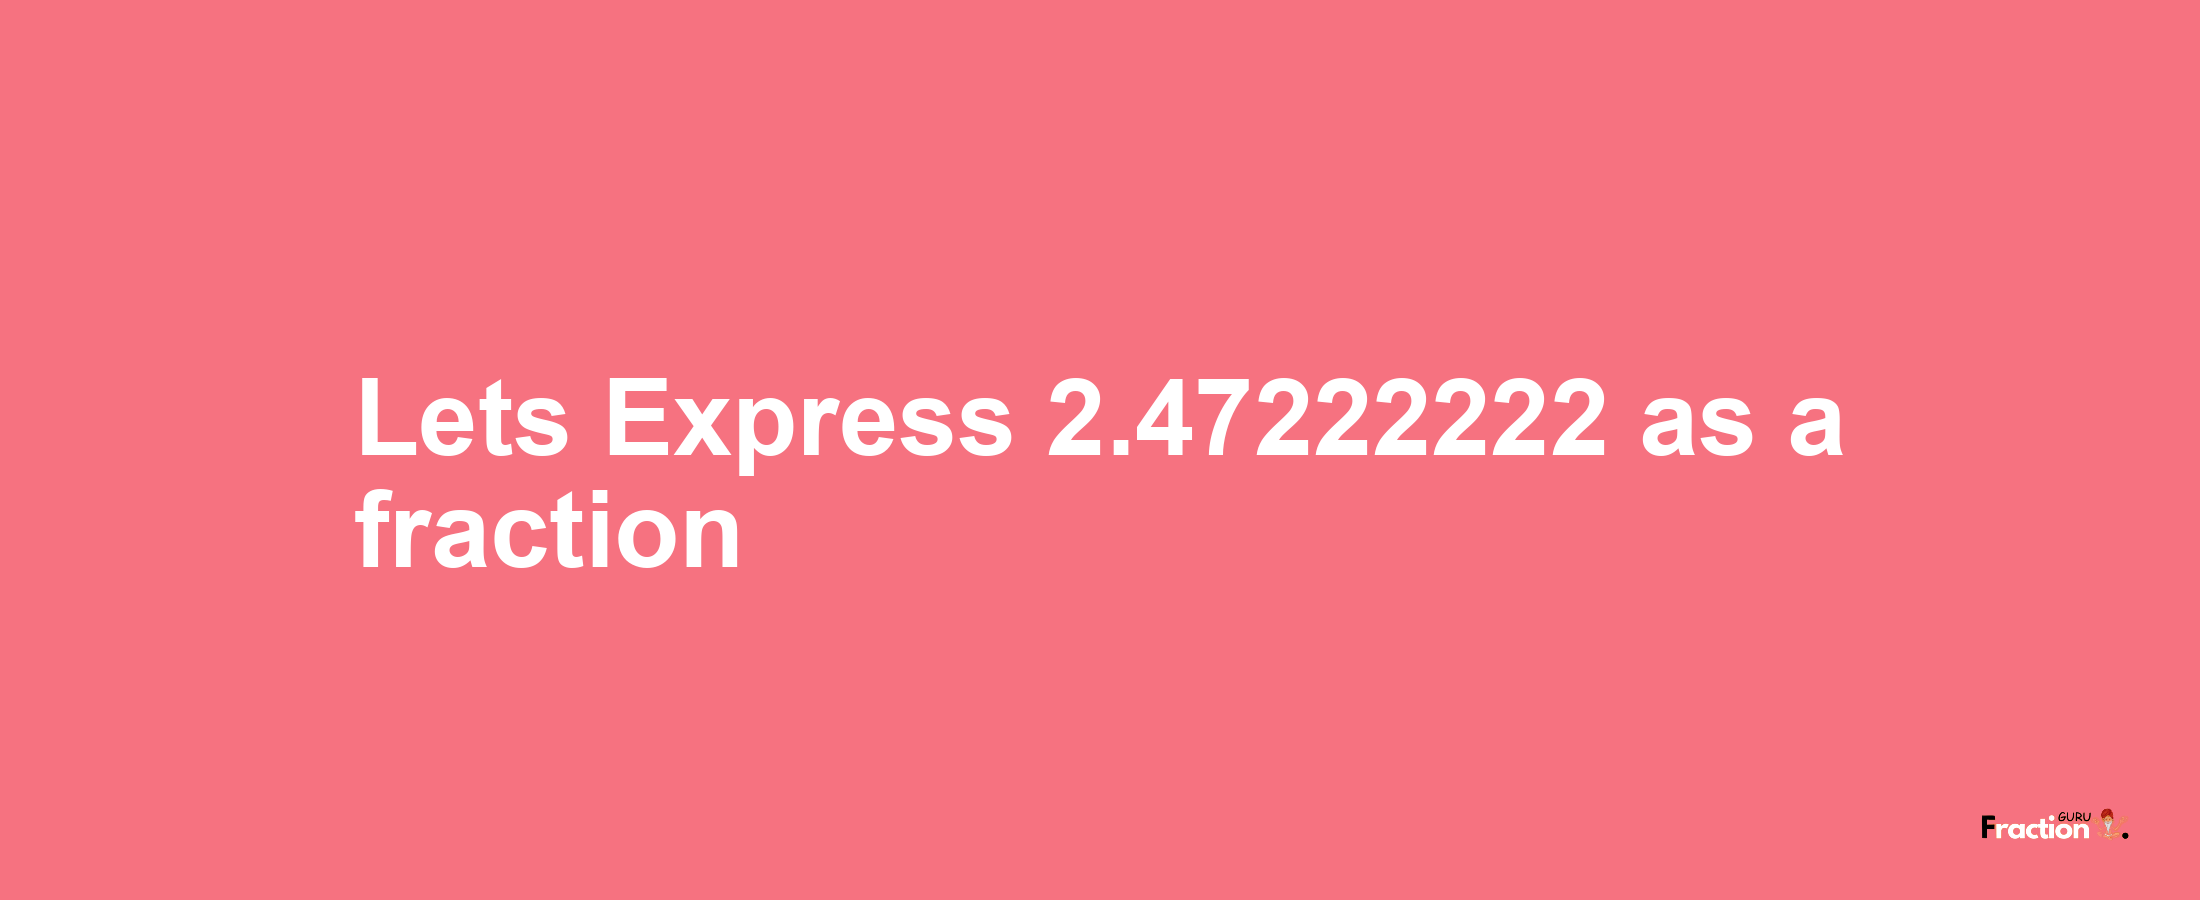 Lets Express 2.47222222 as afraction